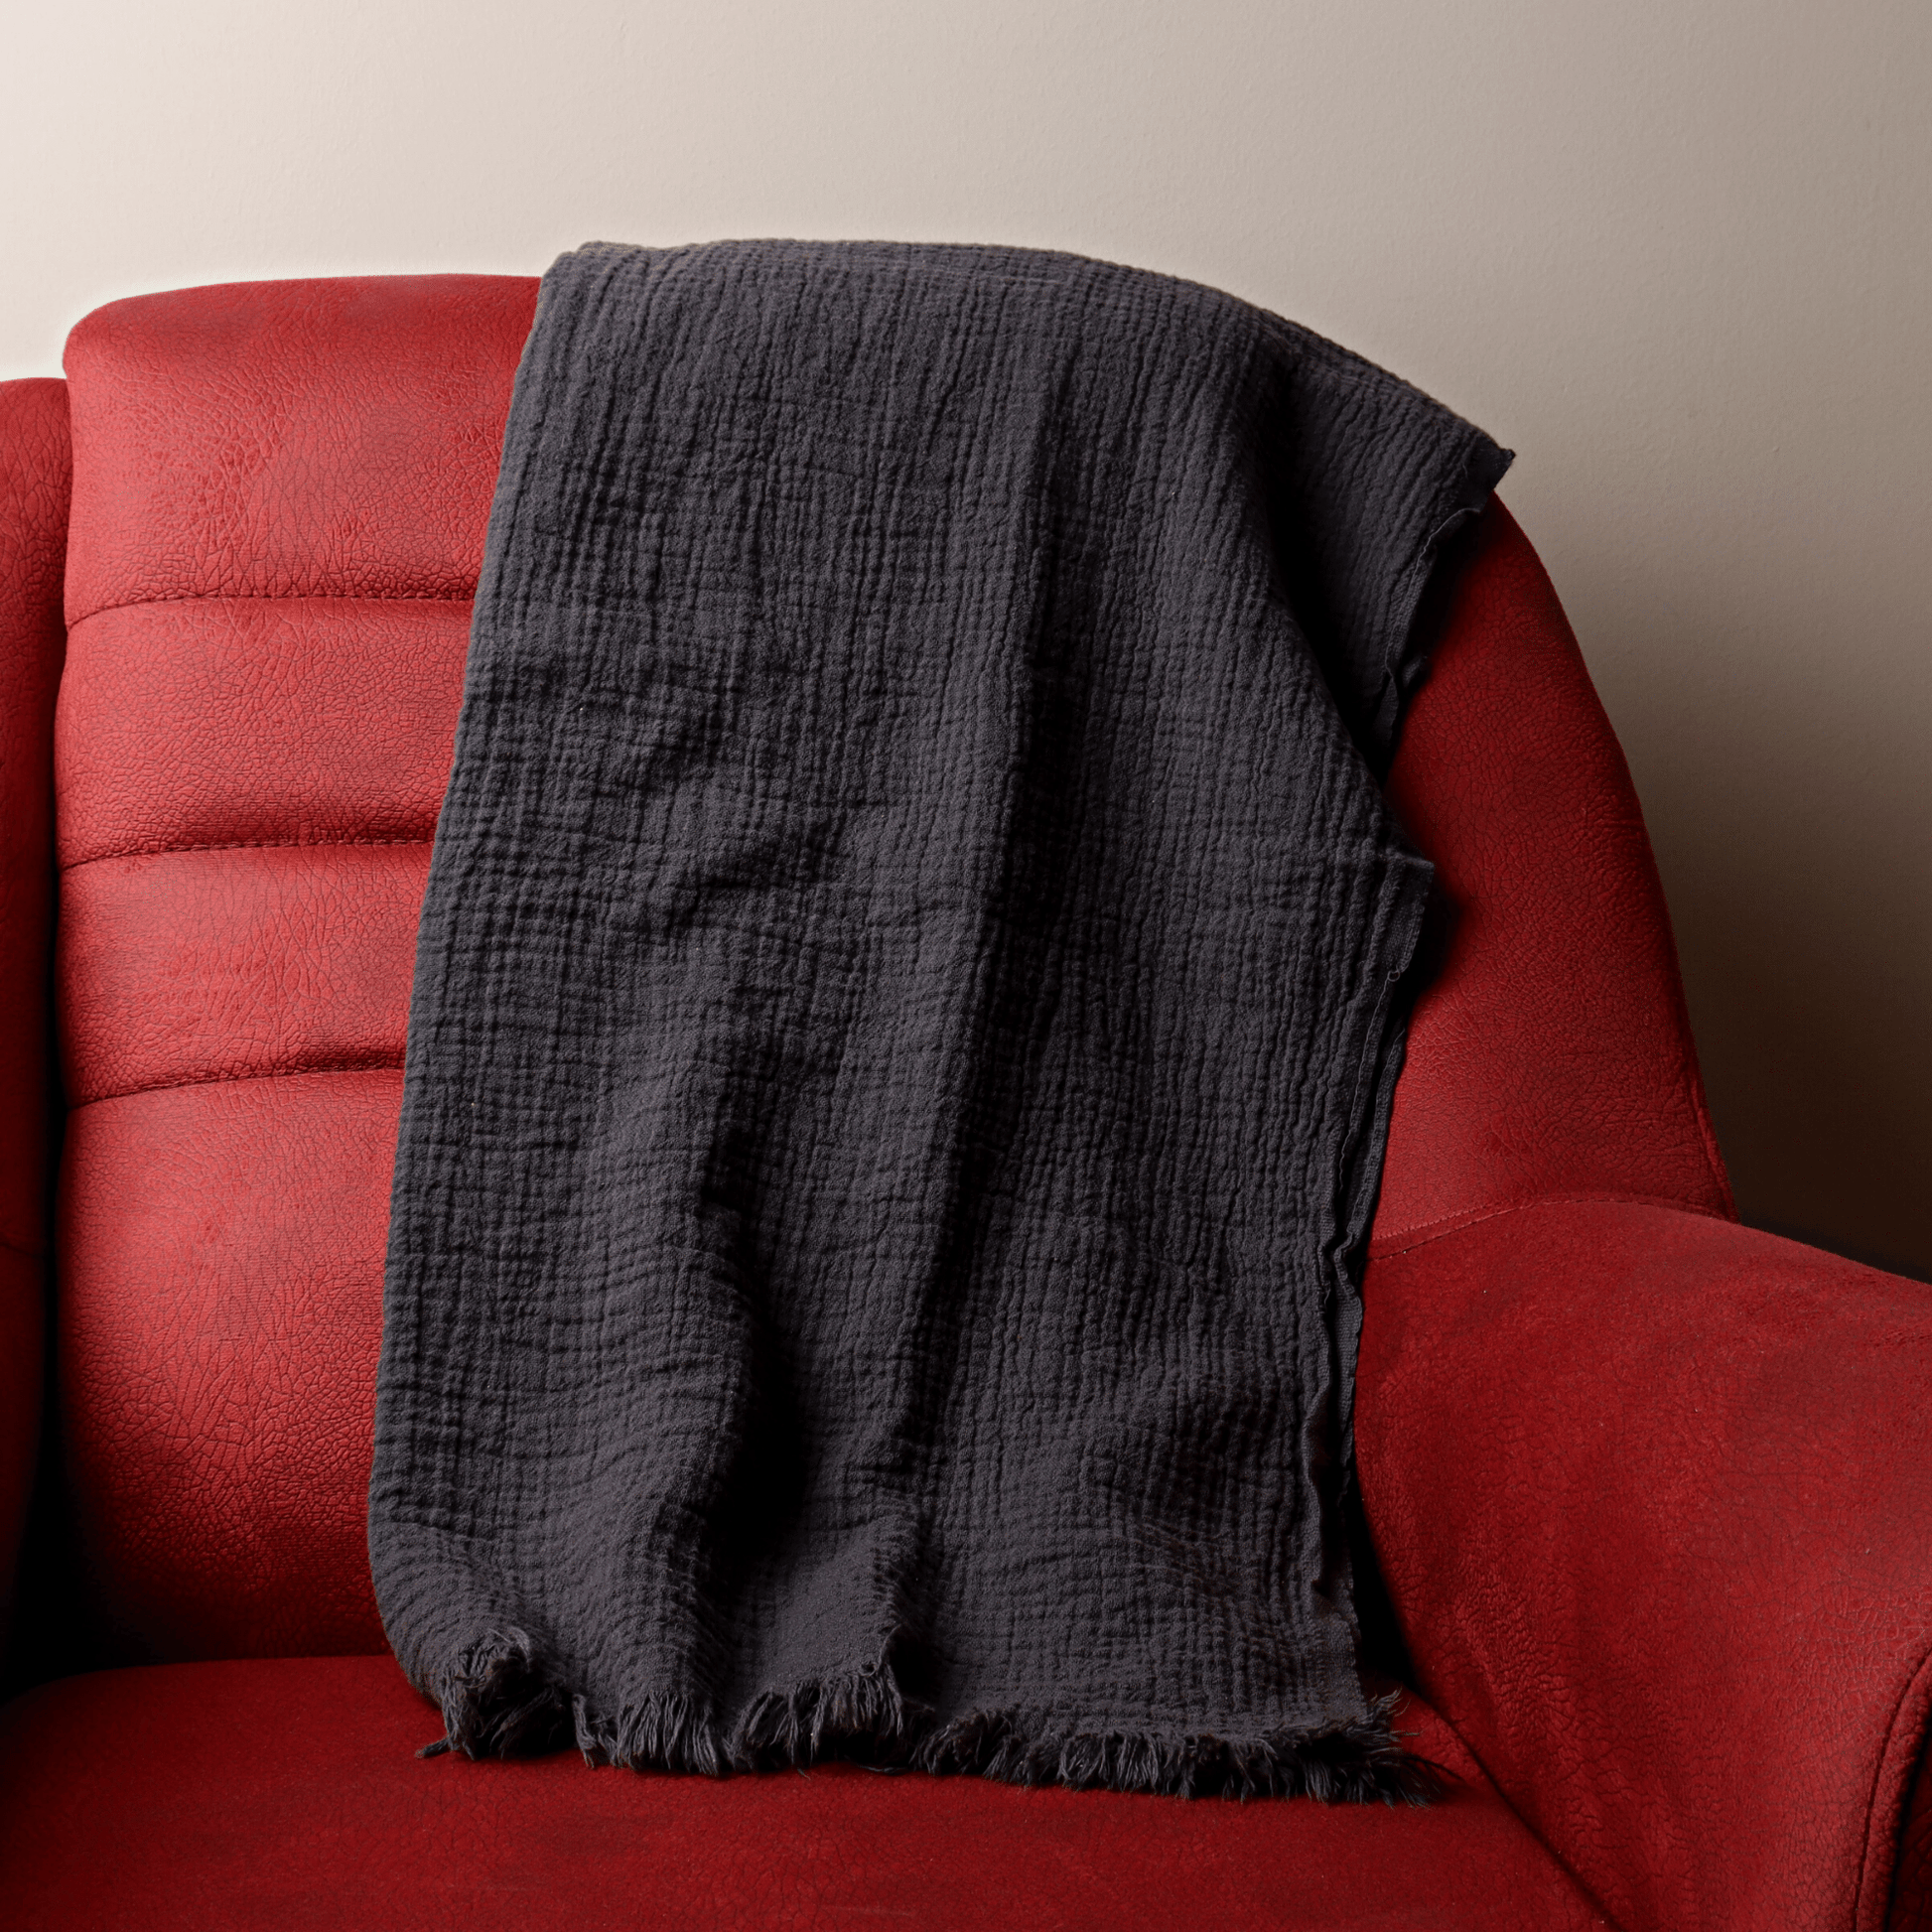 Anthracite Muslin Towel for Adults